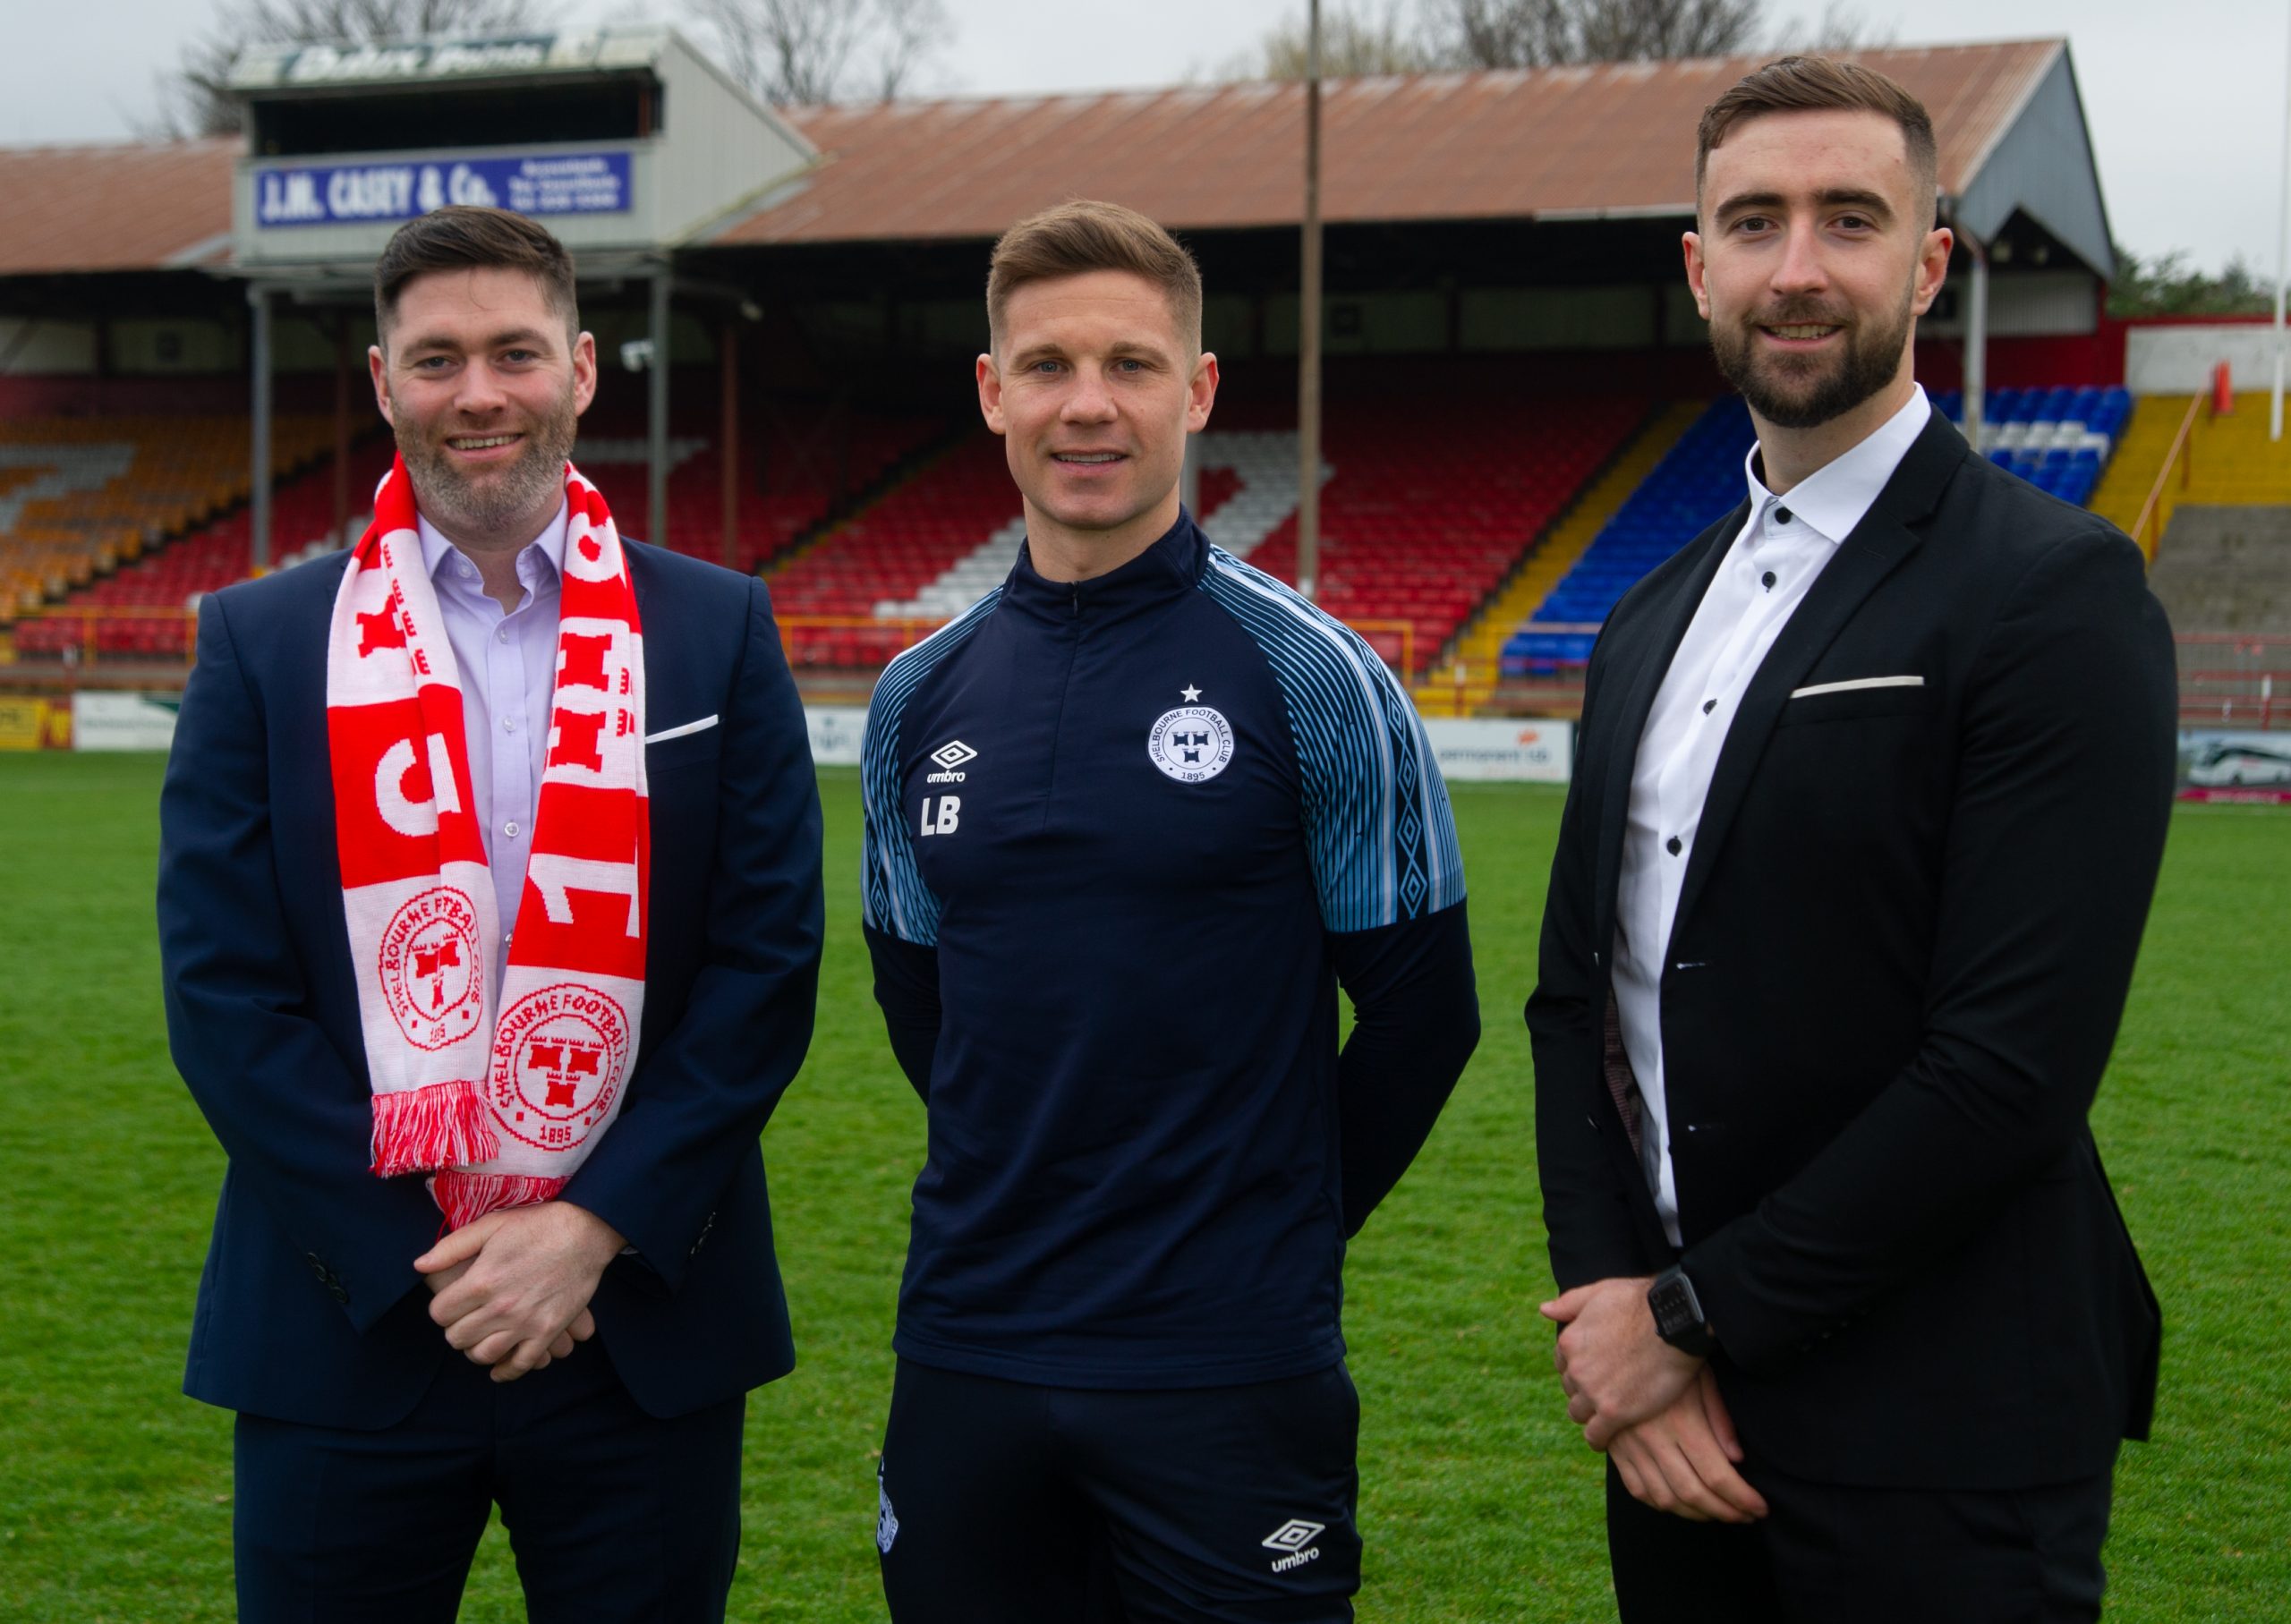 Shelbourne announces new sponsorship agreement with EIDA Solutions